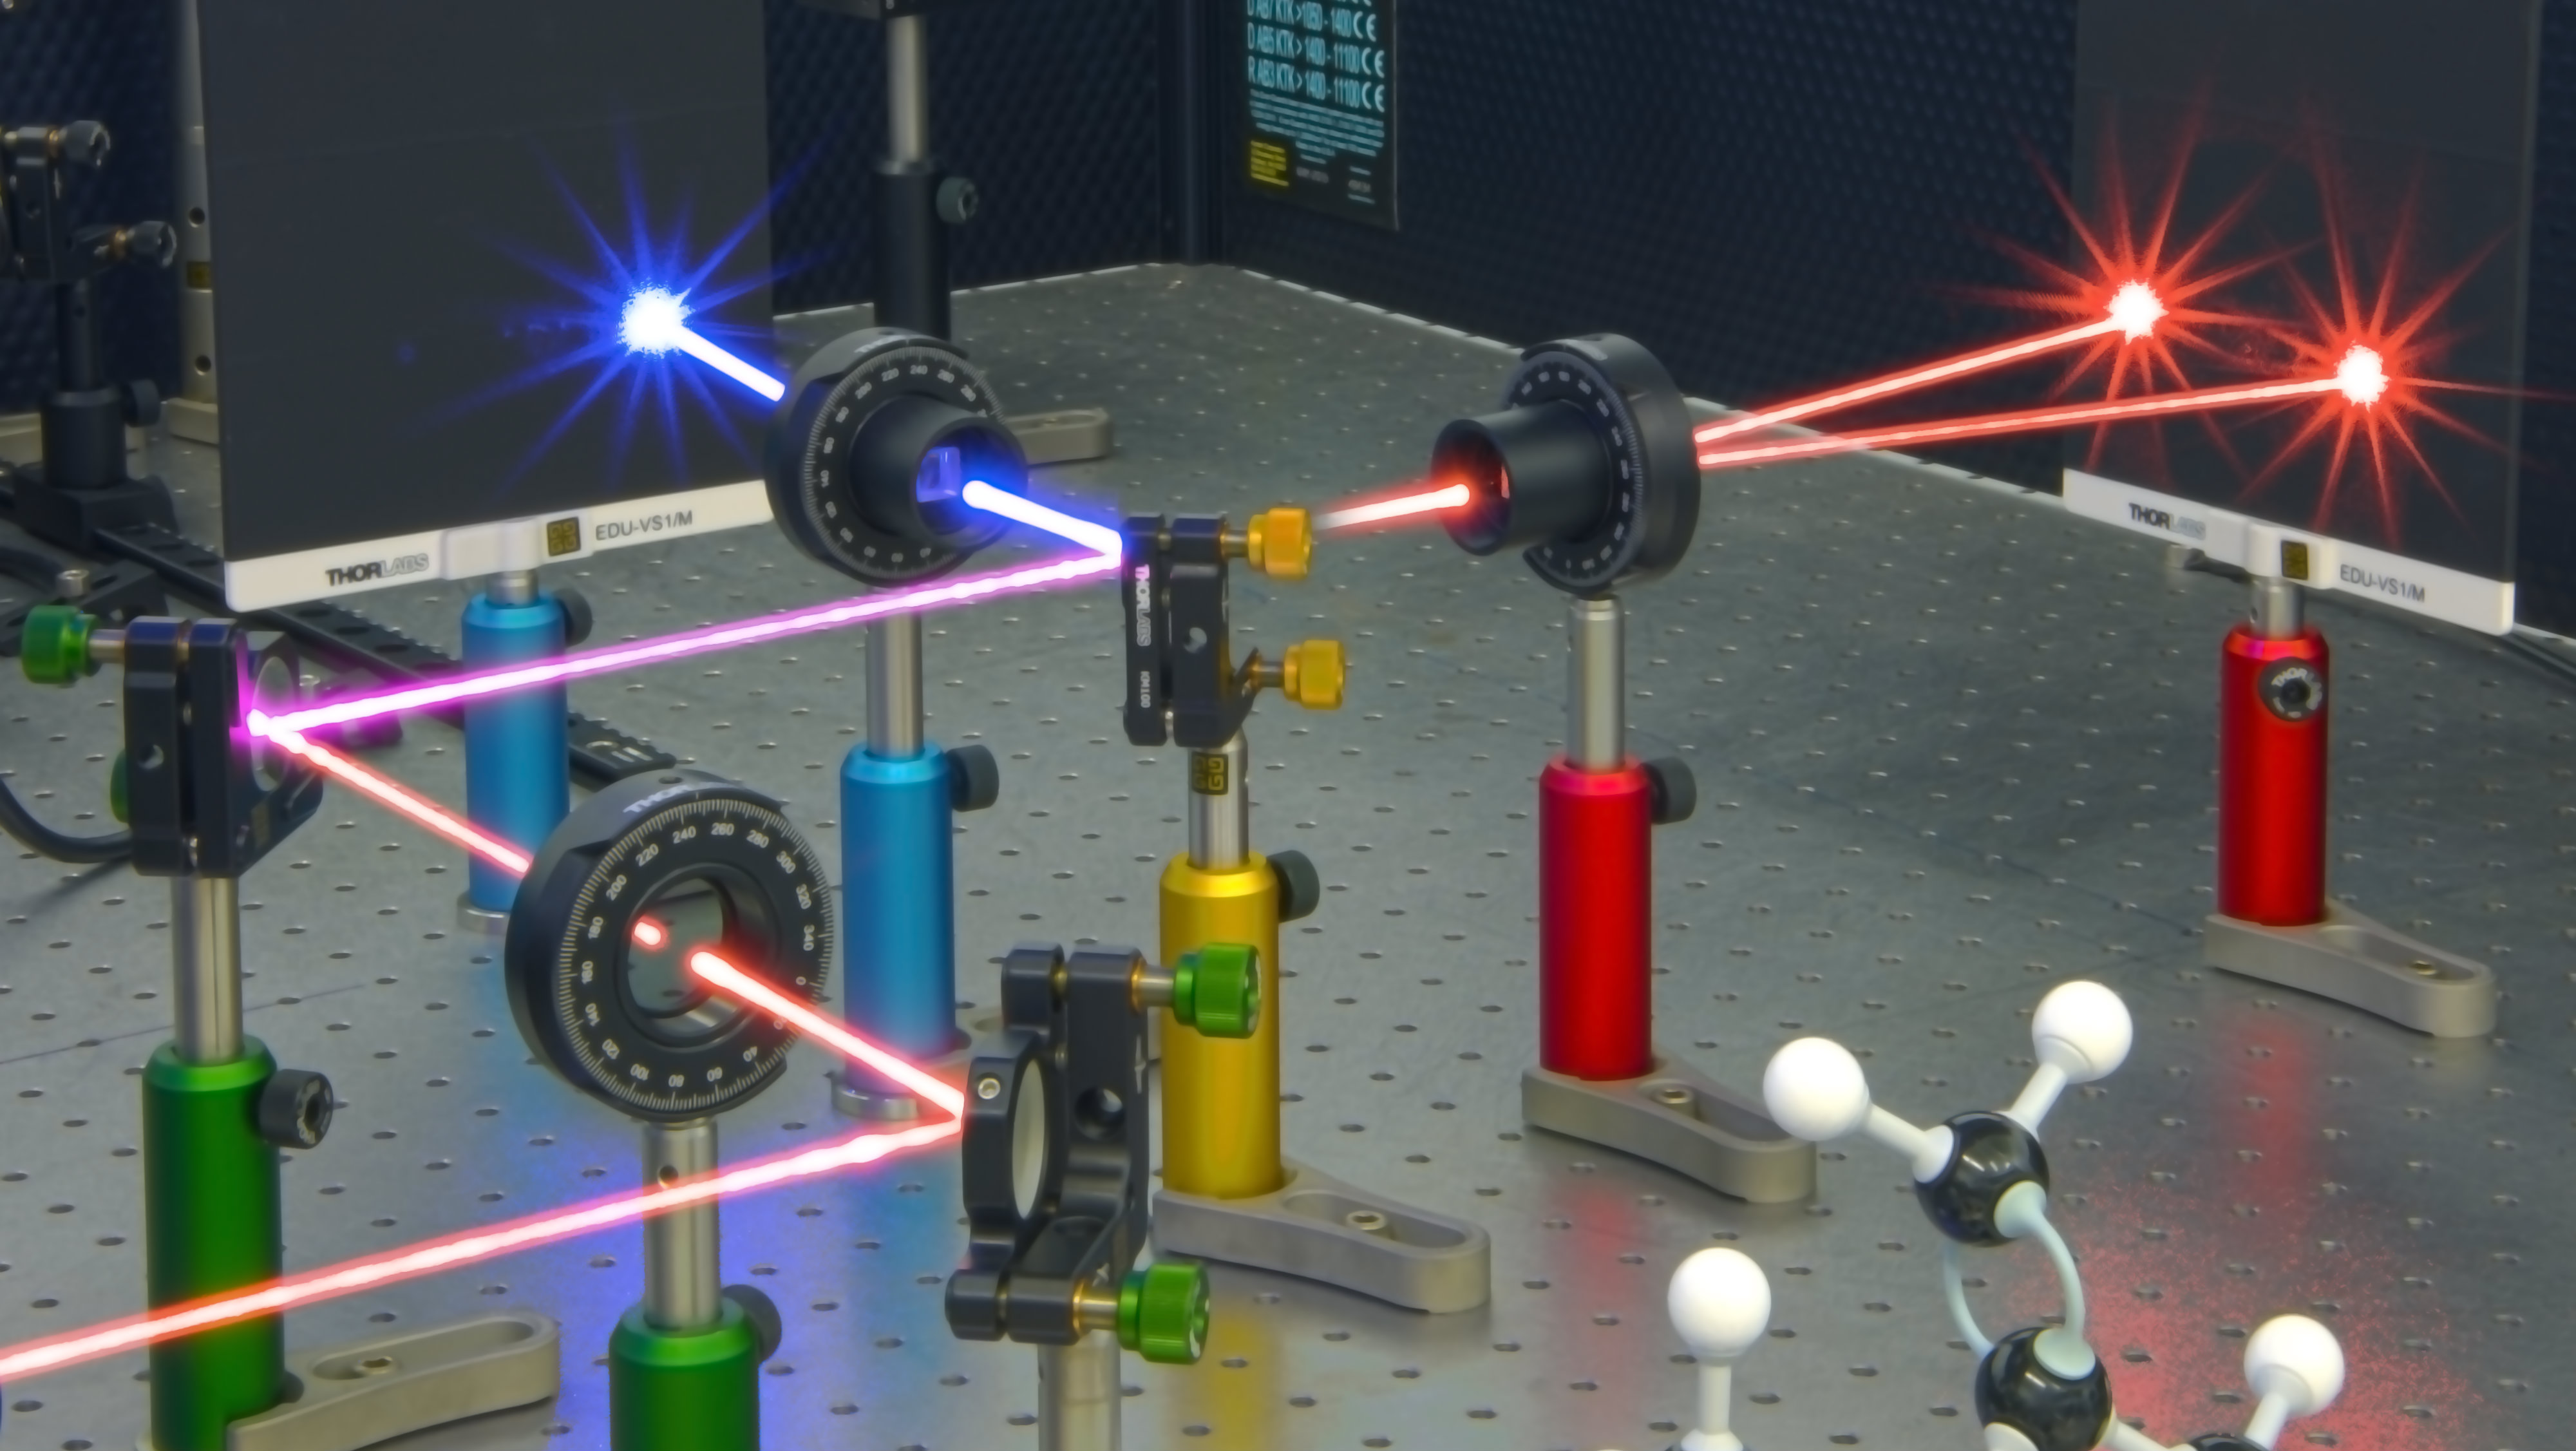 The experimental set up caused a laser beam to change from red to blue